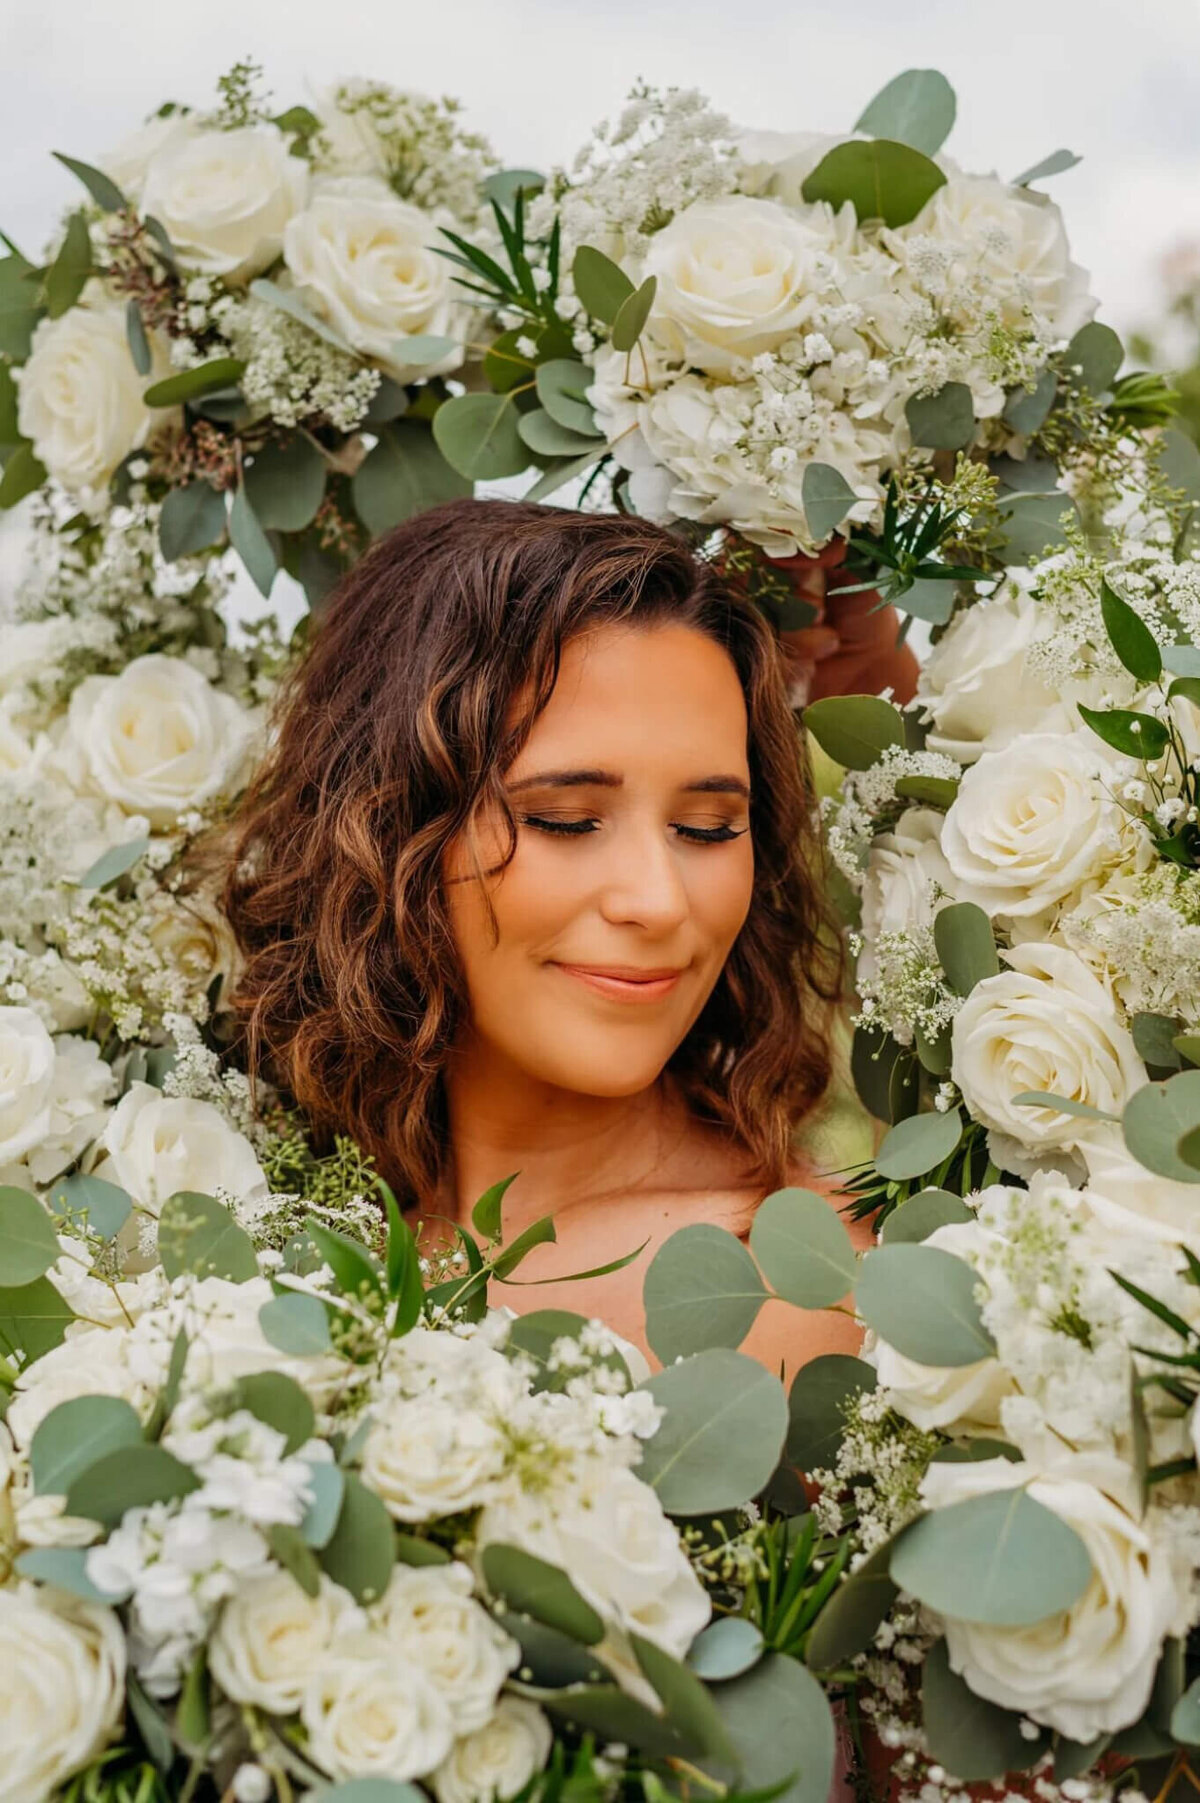 Photo of a woman smiling and closing her eyes popping surrounded by white florals and greenery